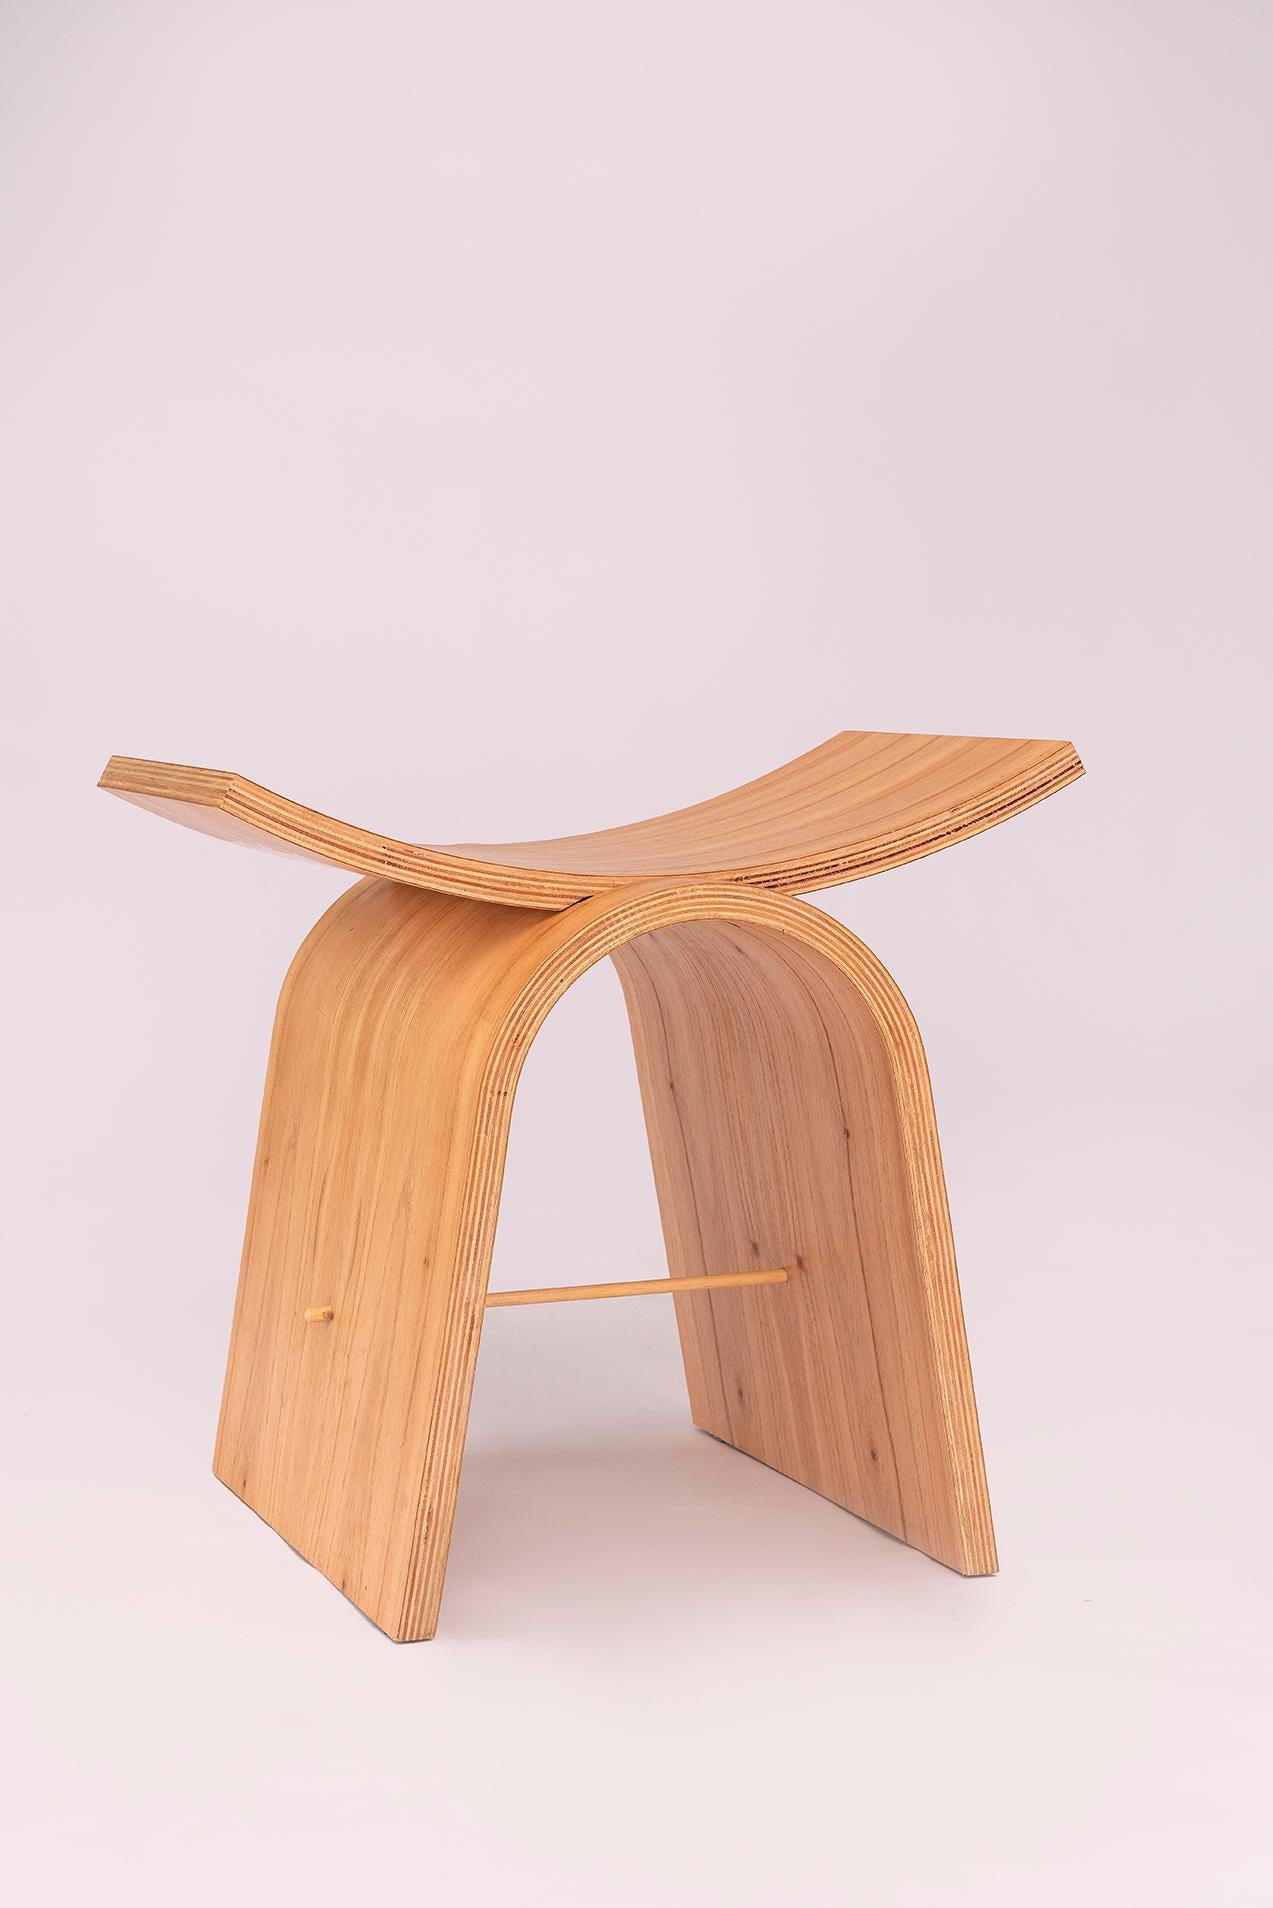 Fuji stool was created from the intersection of modern Scandinavian bend design and Japanese minimalism.

This curious source of inspiration came from the fact that, in many ways, the two strands touched on issues such as respect for raw materials